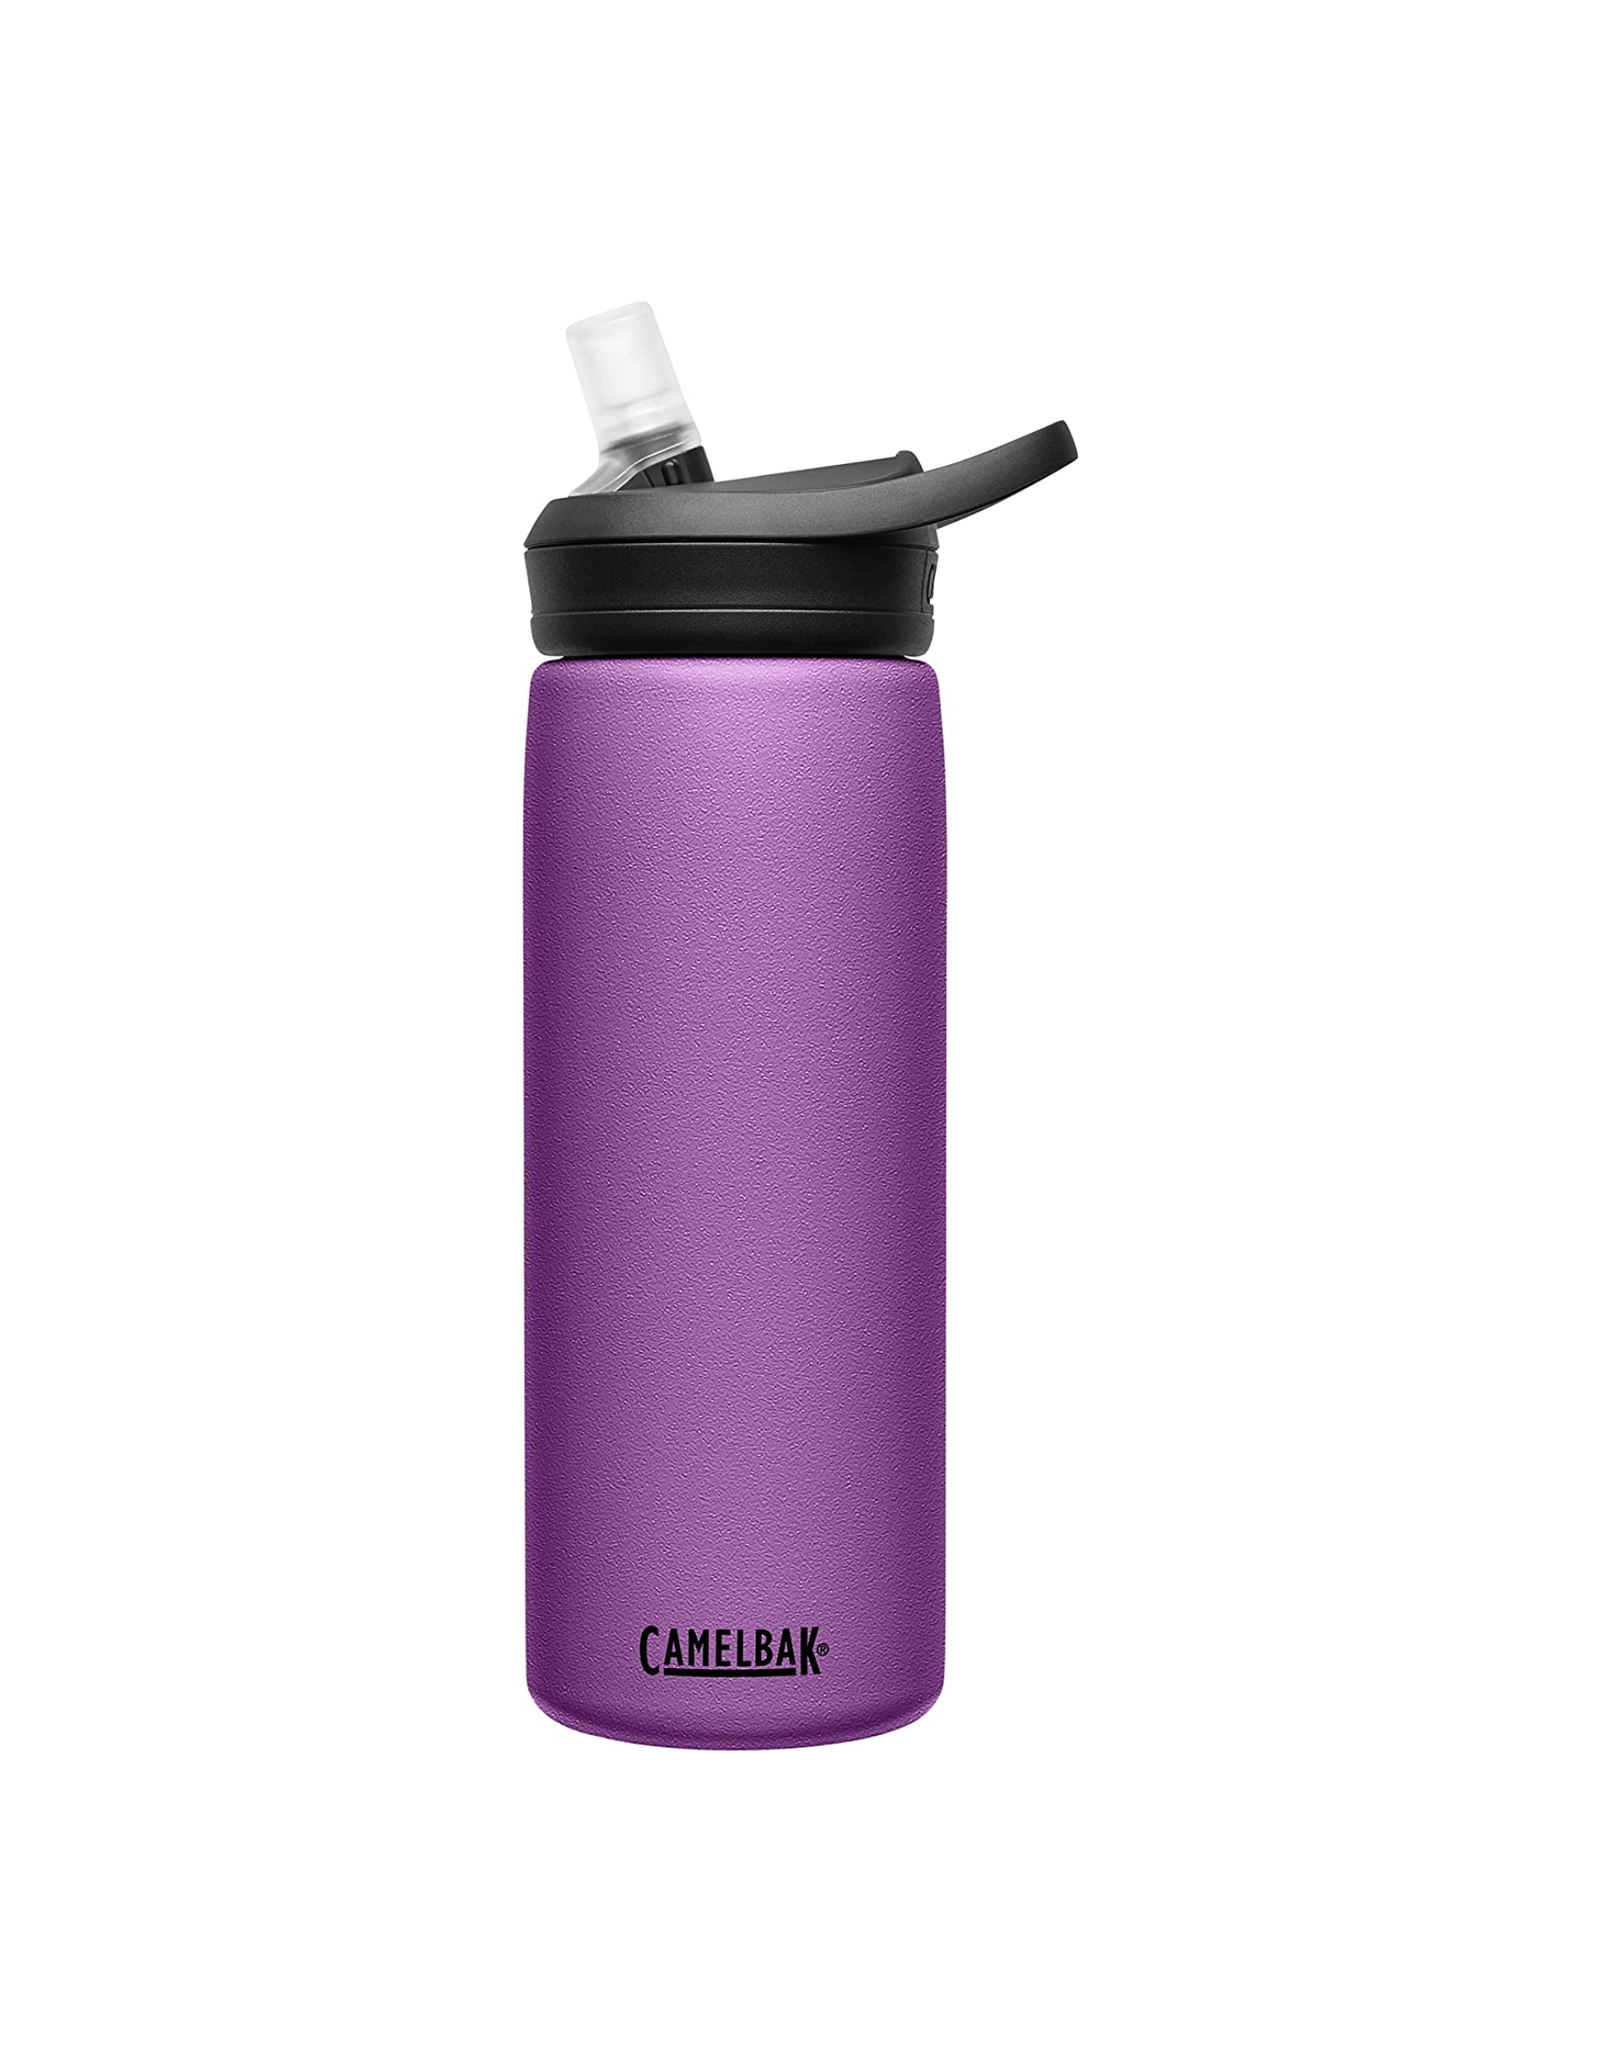 CamelBak Eddy+ Water Bottle with Straw, Insulated Stainless Steel, 20 oz, Magenta